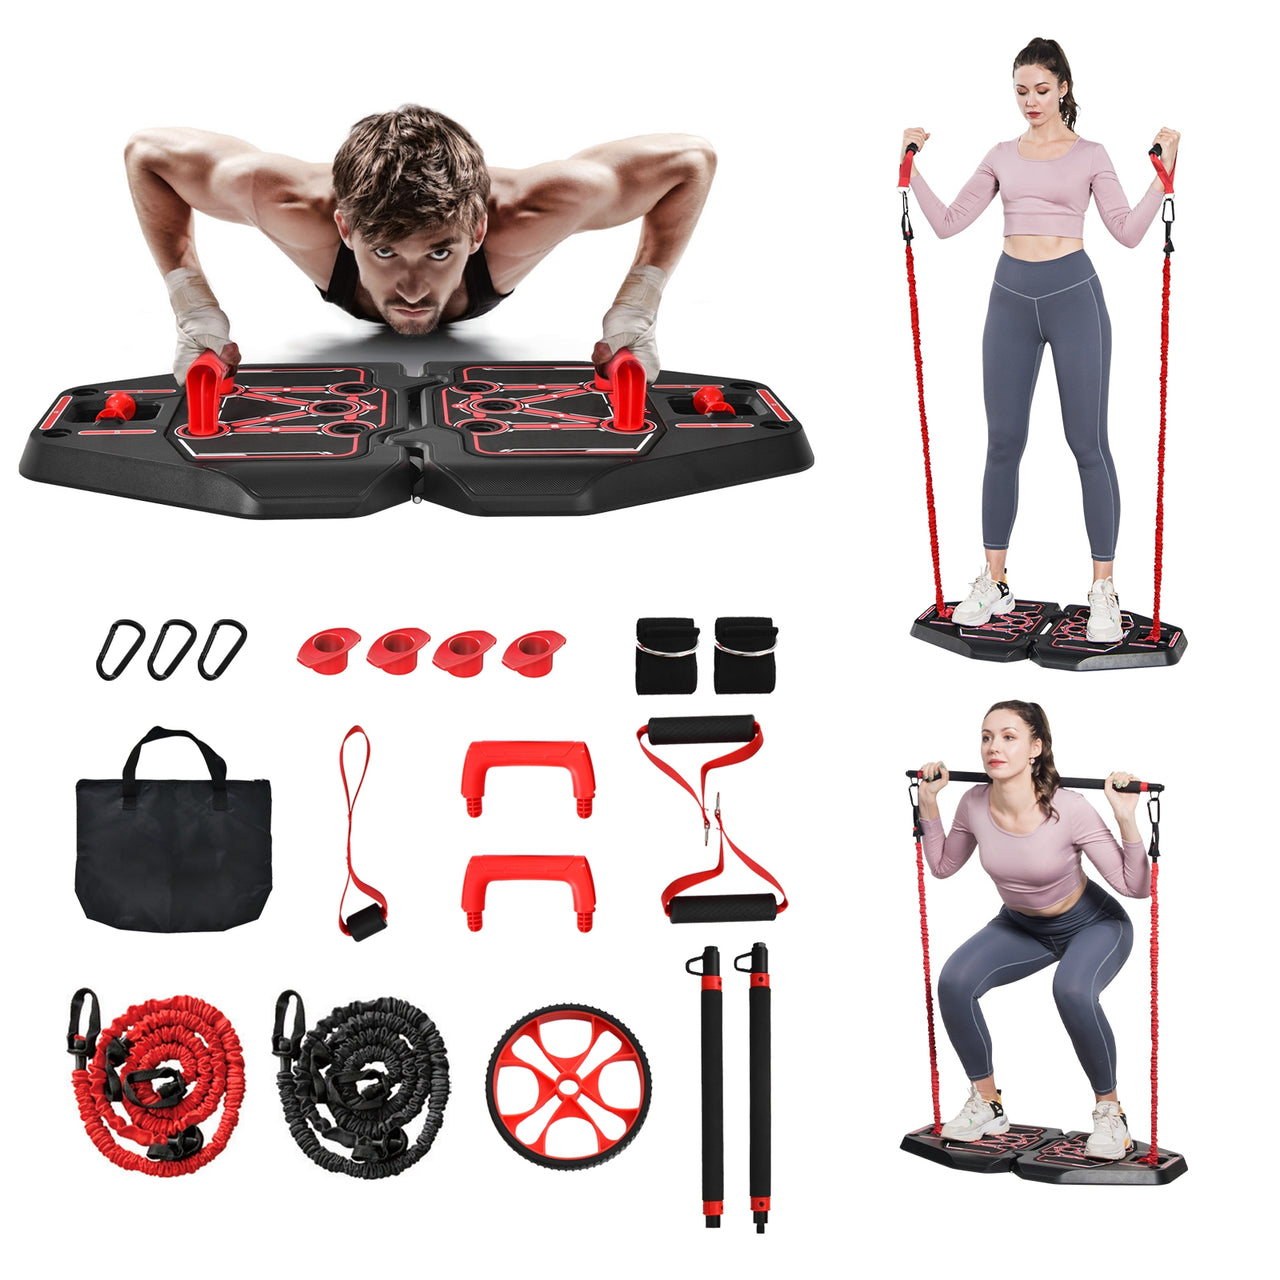 All-in-one Portable Pushup Board with Bag - Gallery View 13 of 13